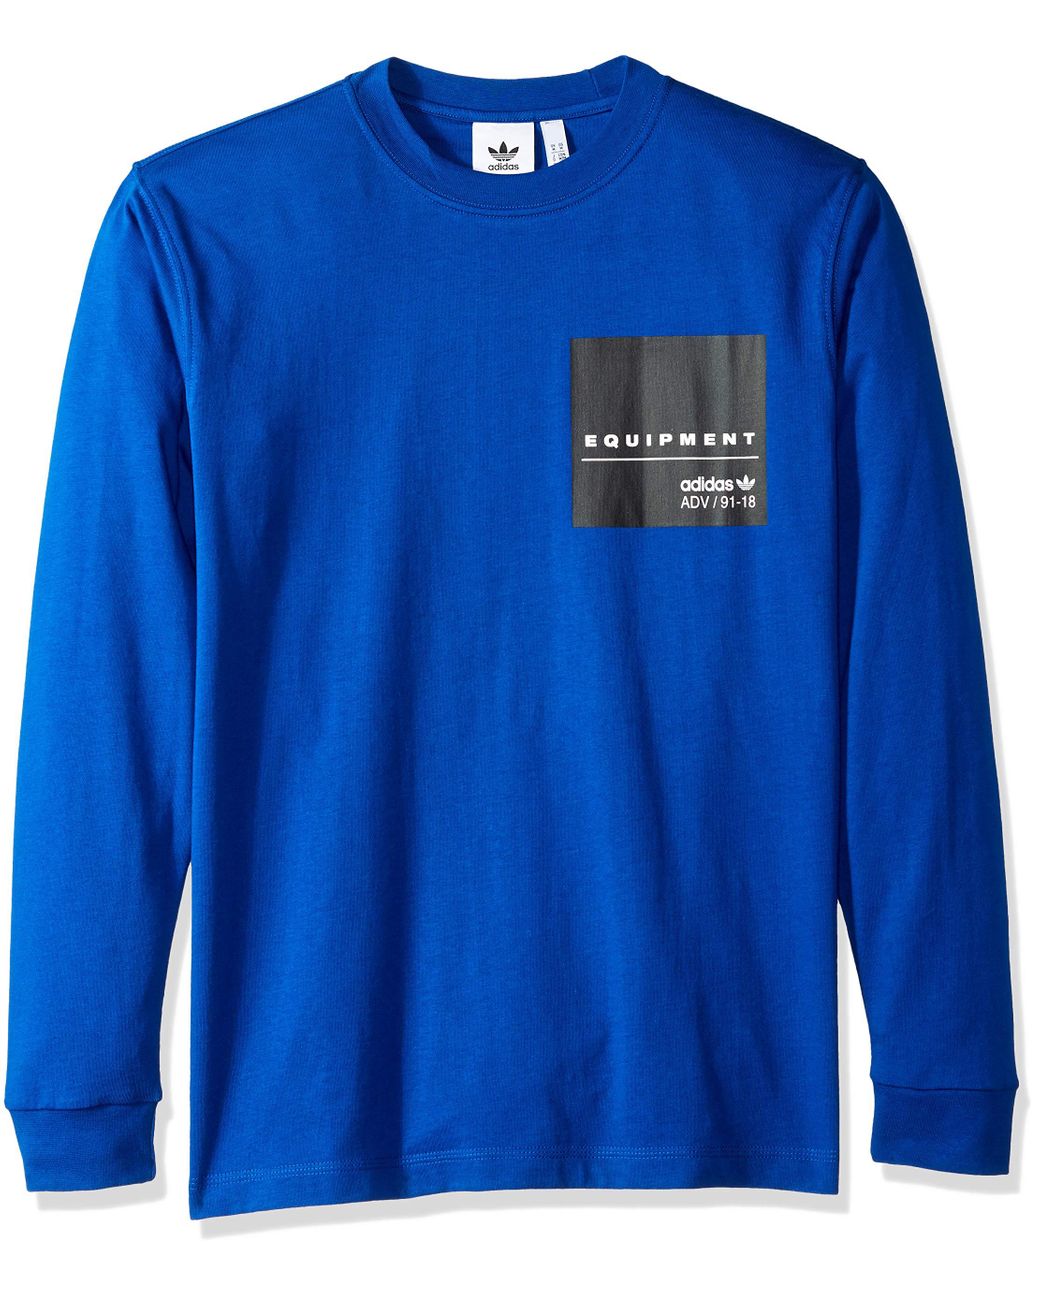 adidas Originals Cotton Eqt Long Sleeve Graphic Tee in Blue for Men - Lyst